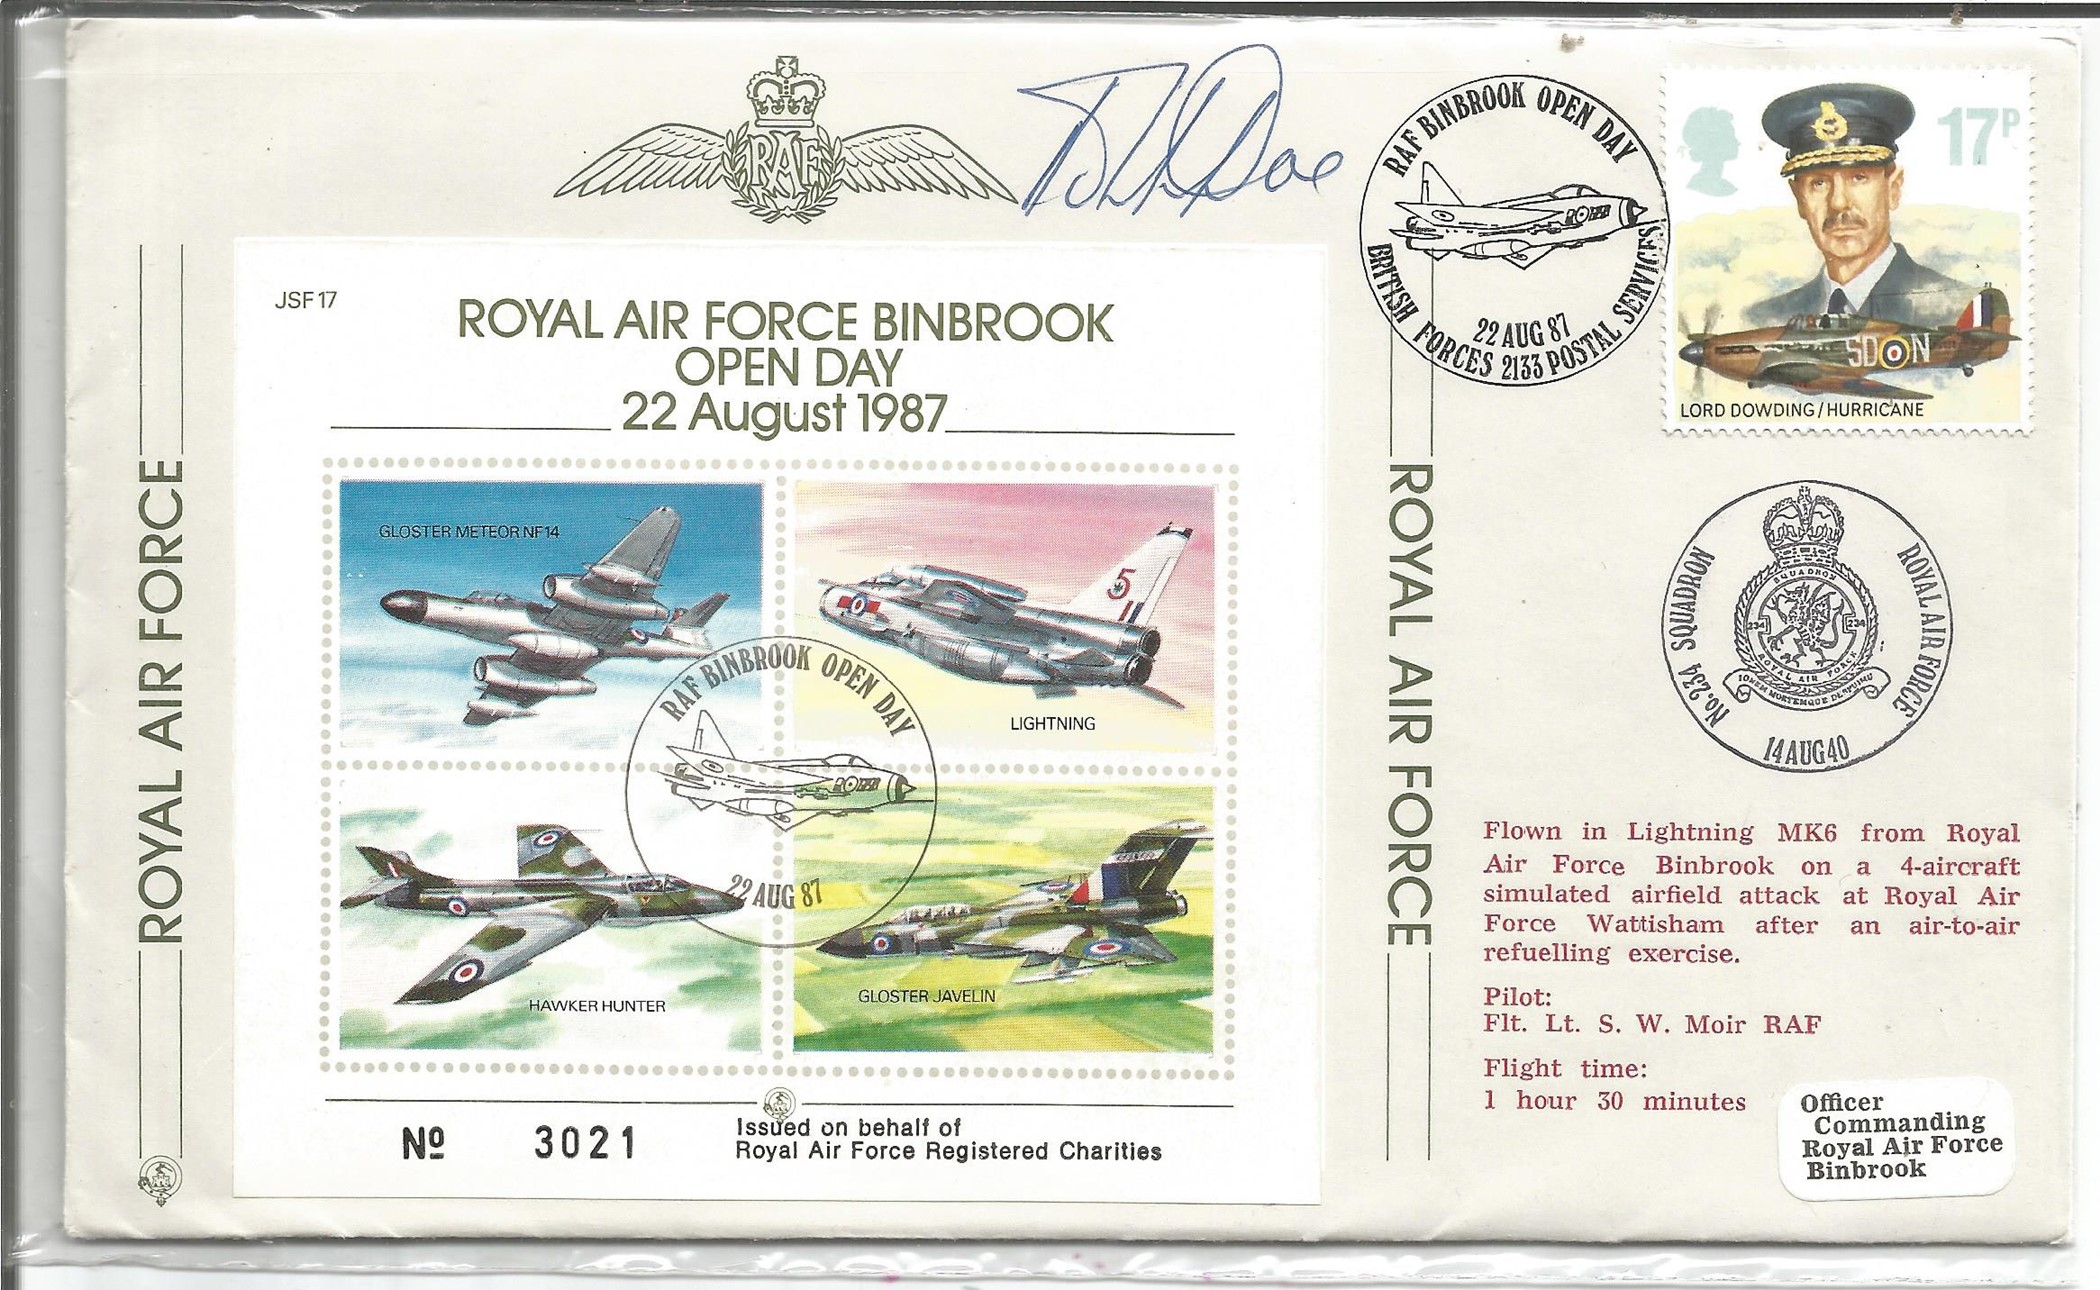 Wg Cdr Bob Doe Signed Royal Air Force Binbrook Open Day 22 August 1987 FDC. British Stamp with 14